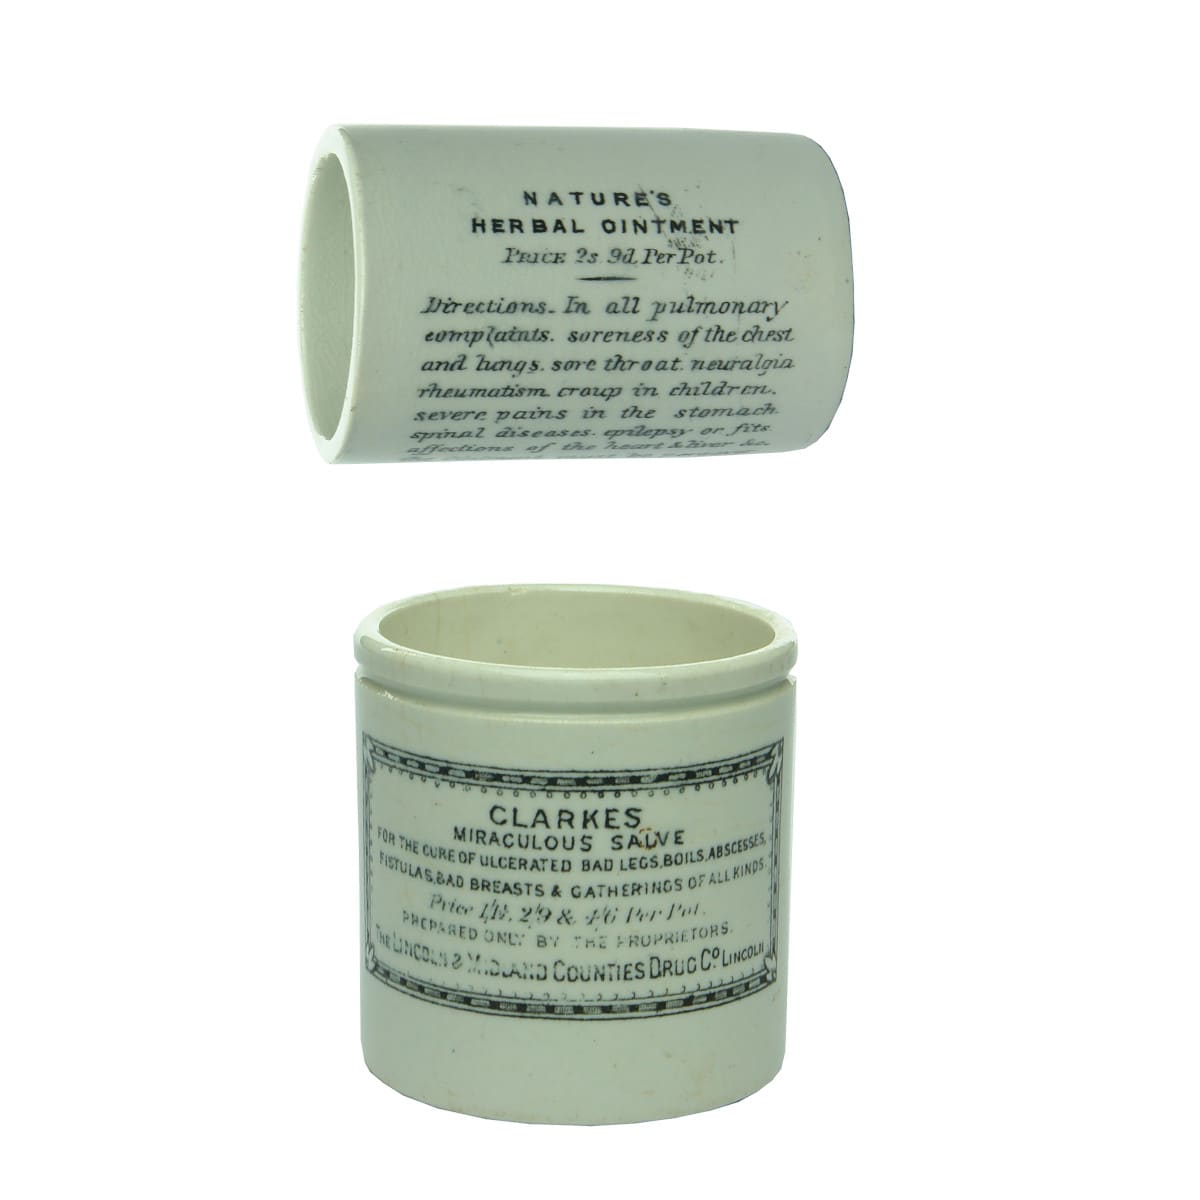 2 Ointment Pots: Fred Hale Nature's Herbal Ointment and Clarkes Miraculous Salve.